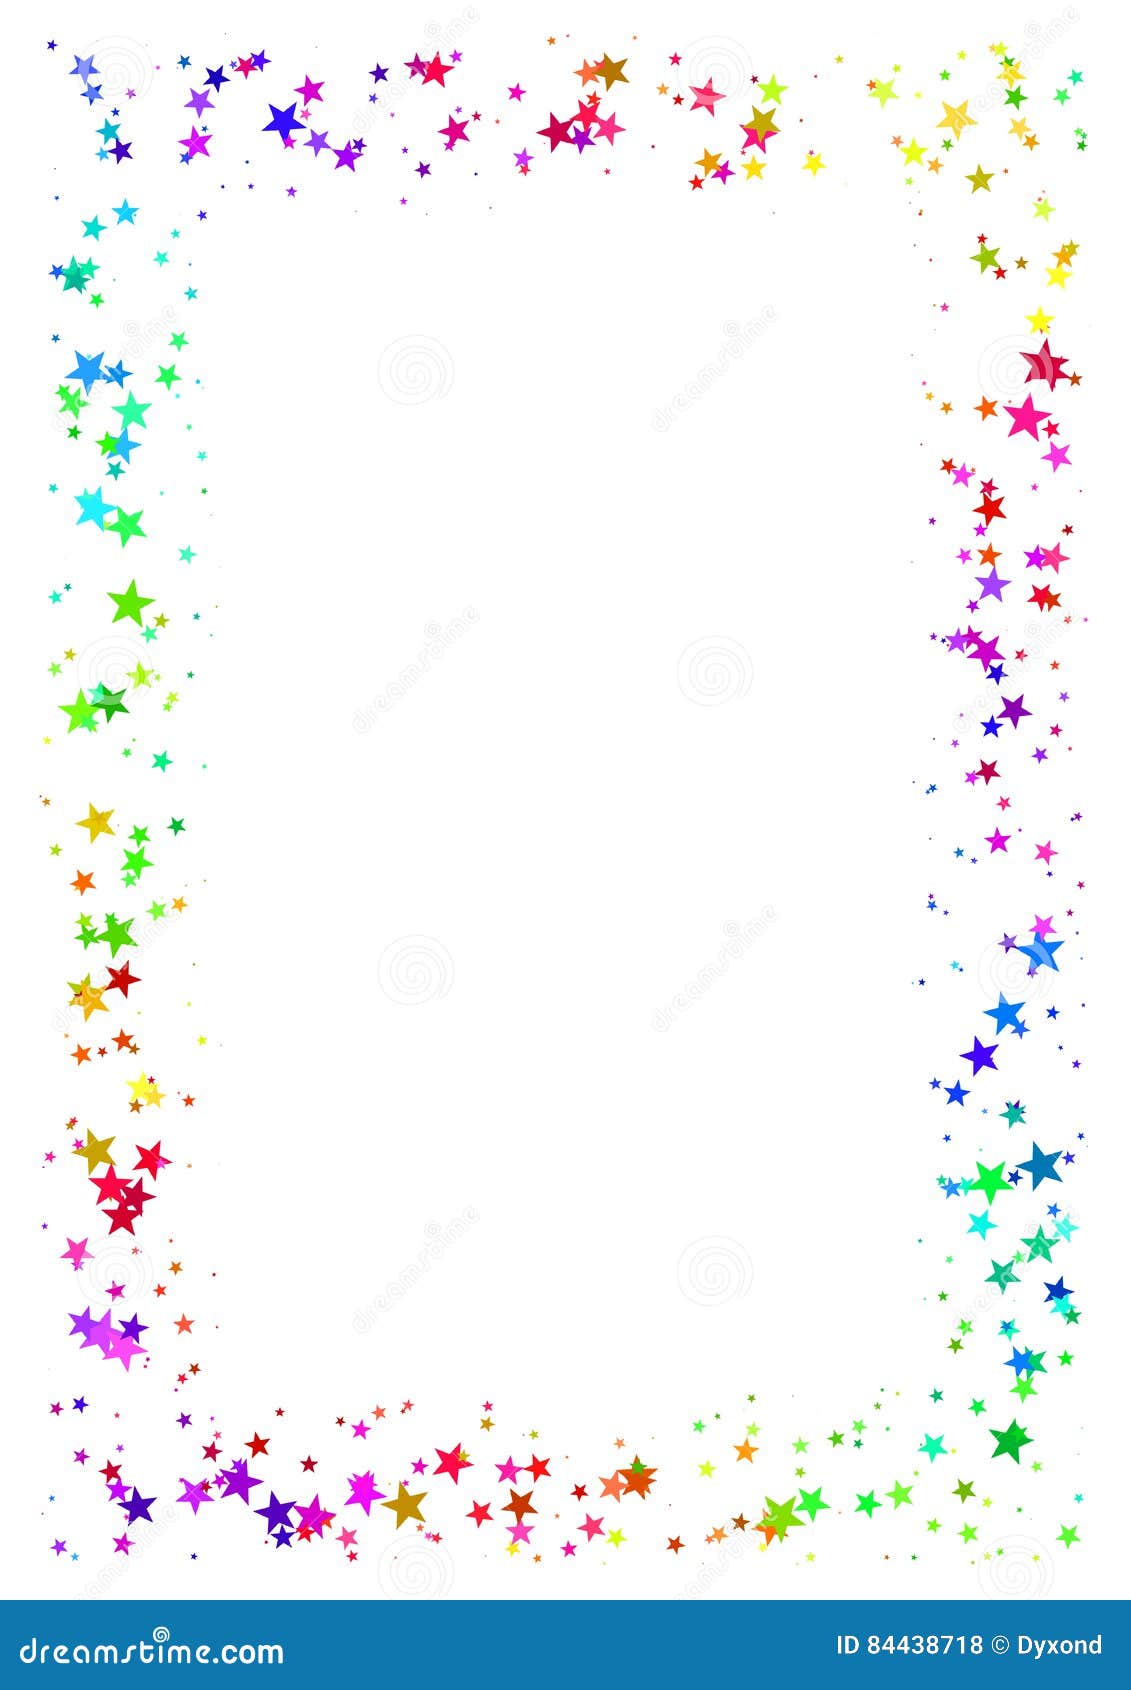 Abstract Frame Made of Colorful Stars on White Background. A4 Paper with  Rainbow Colored Starry Border. Multicolor Illustration. Stock Illustration  - Illustration of decorative, ornate: 84438718